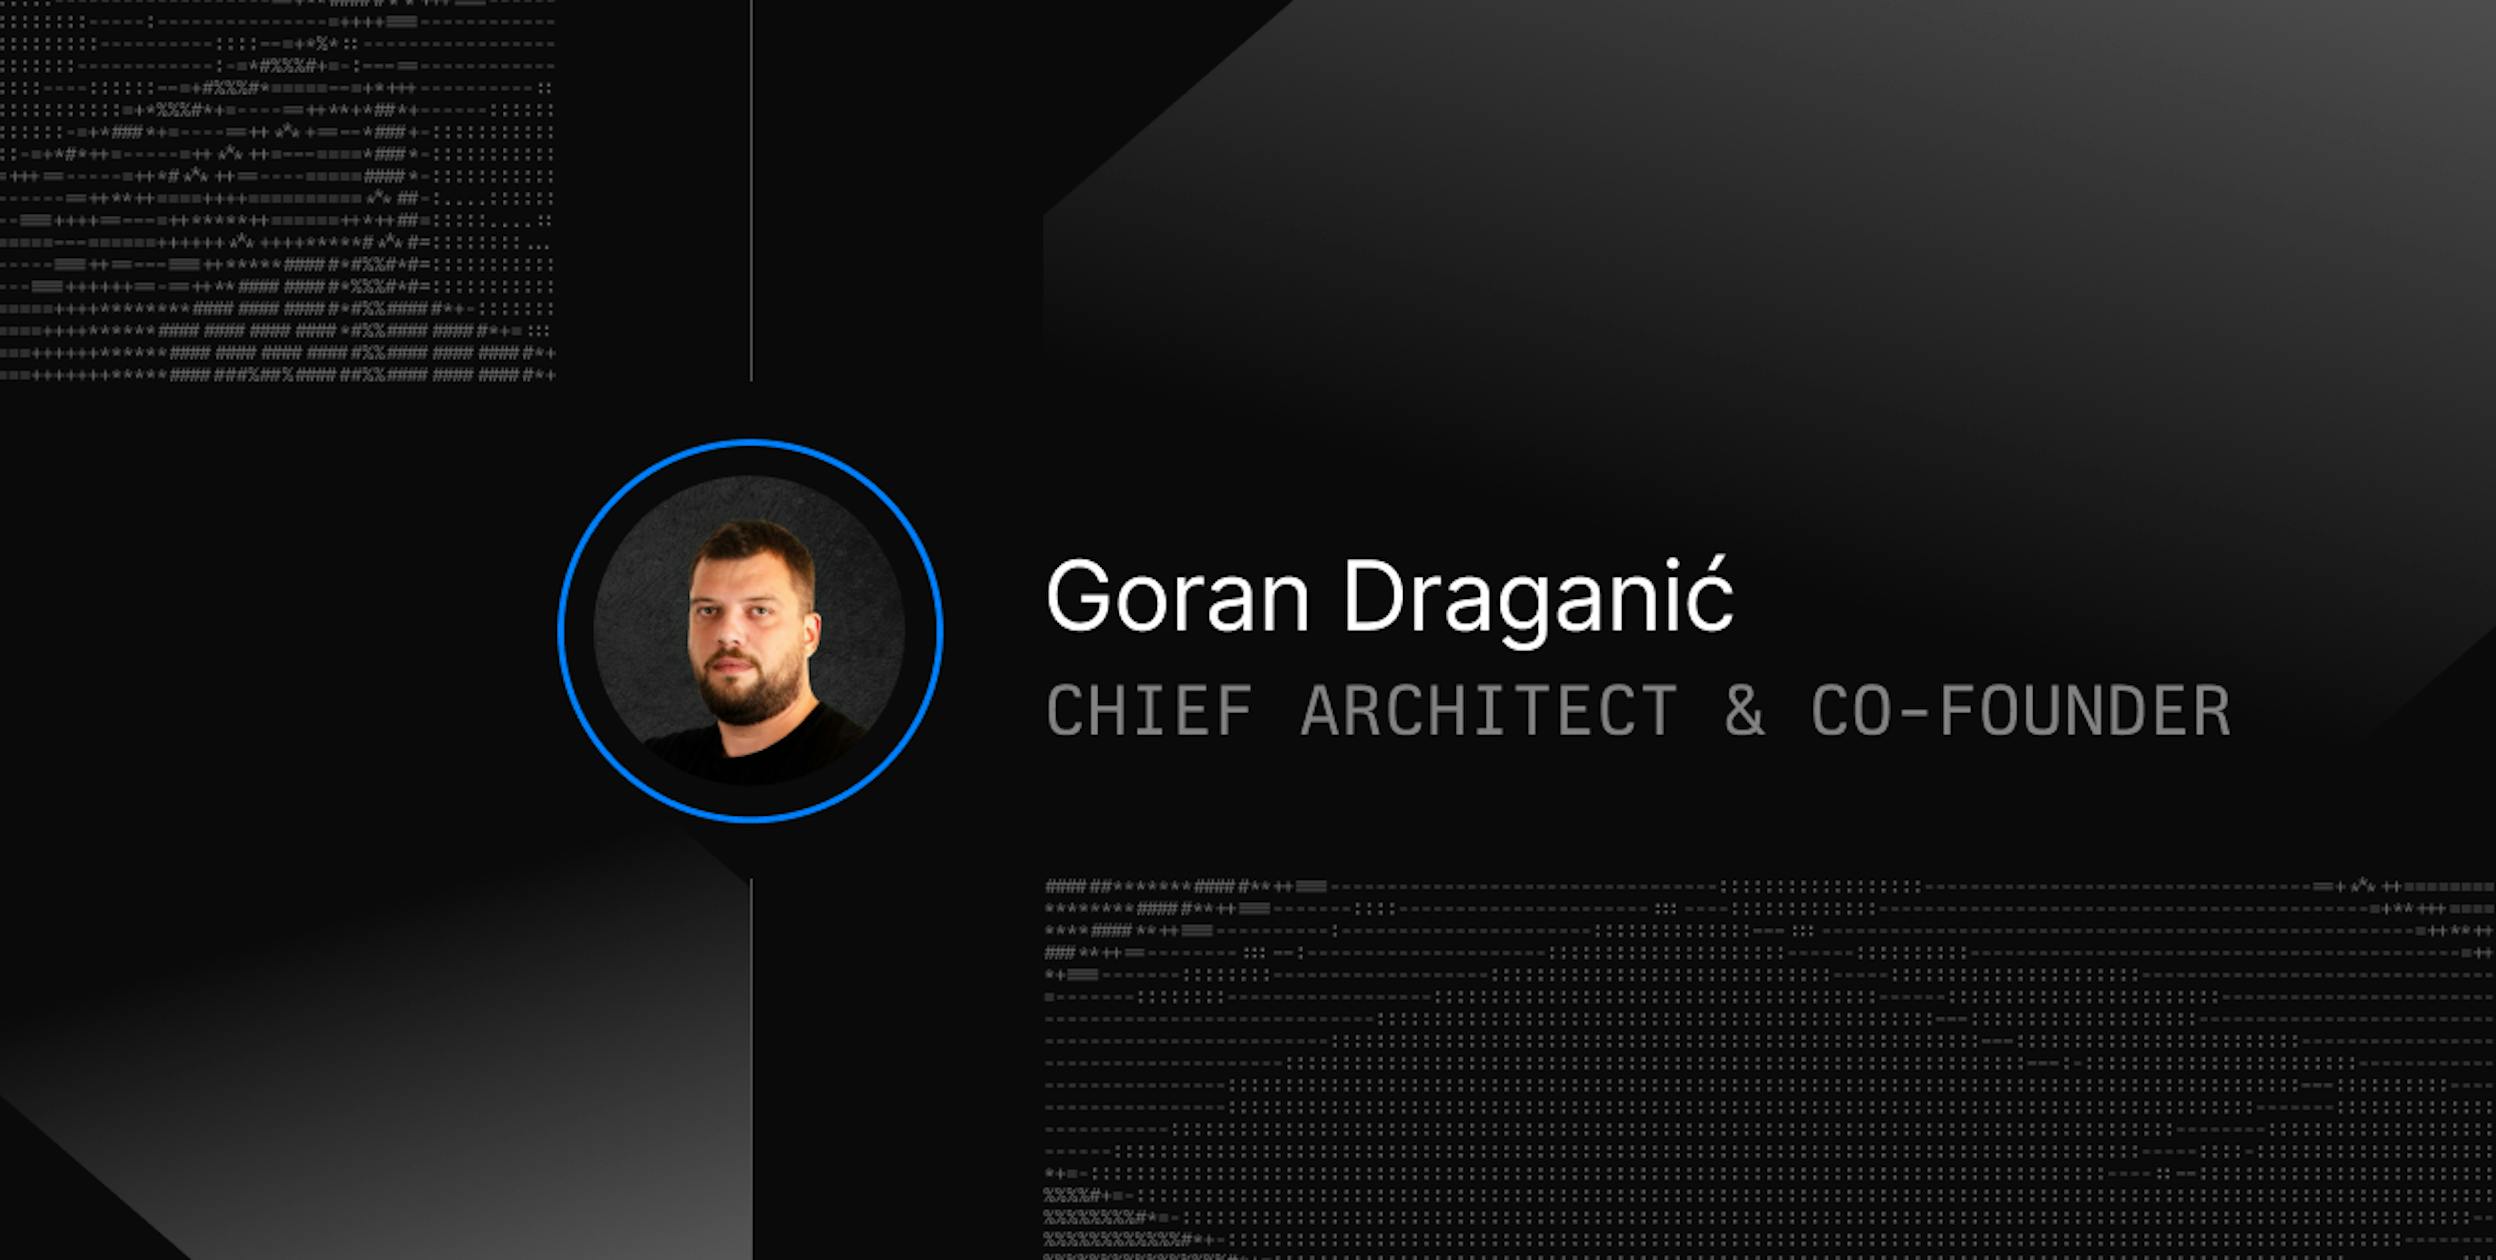 Meet Goran Draganić, Our Co-founder and Chief Architect